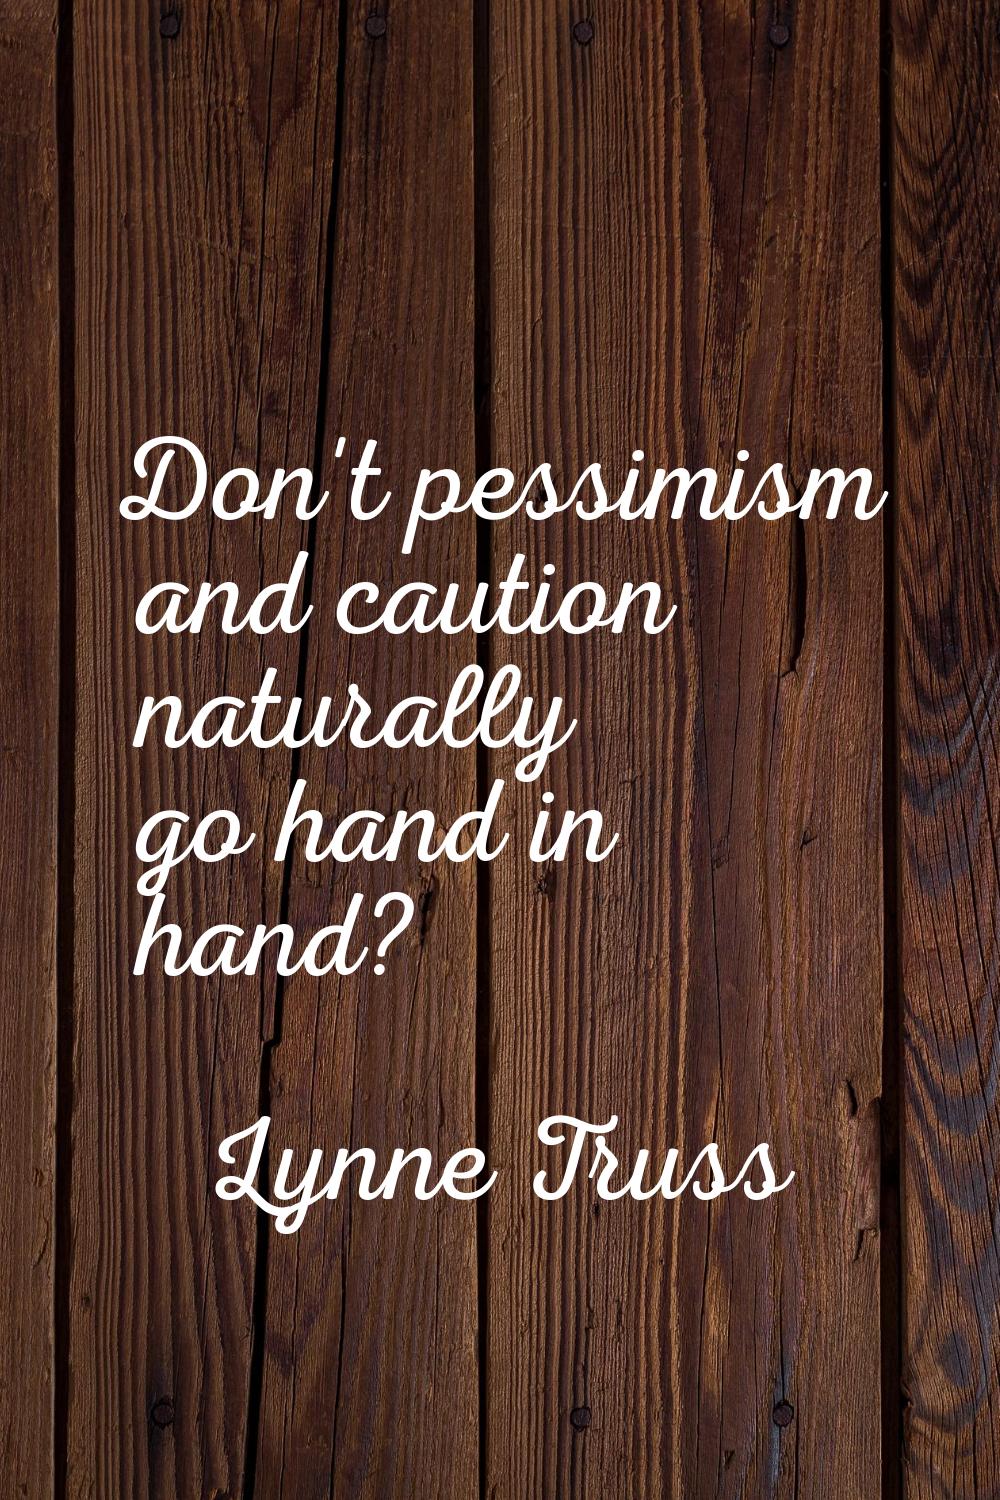 Don't pessimism and caution naturally go hand in hand?